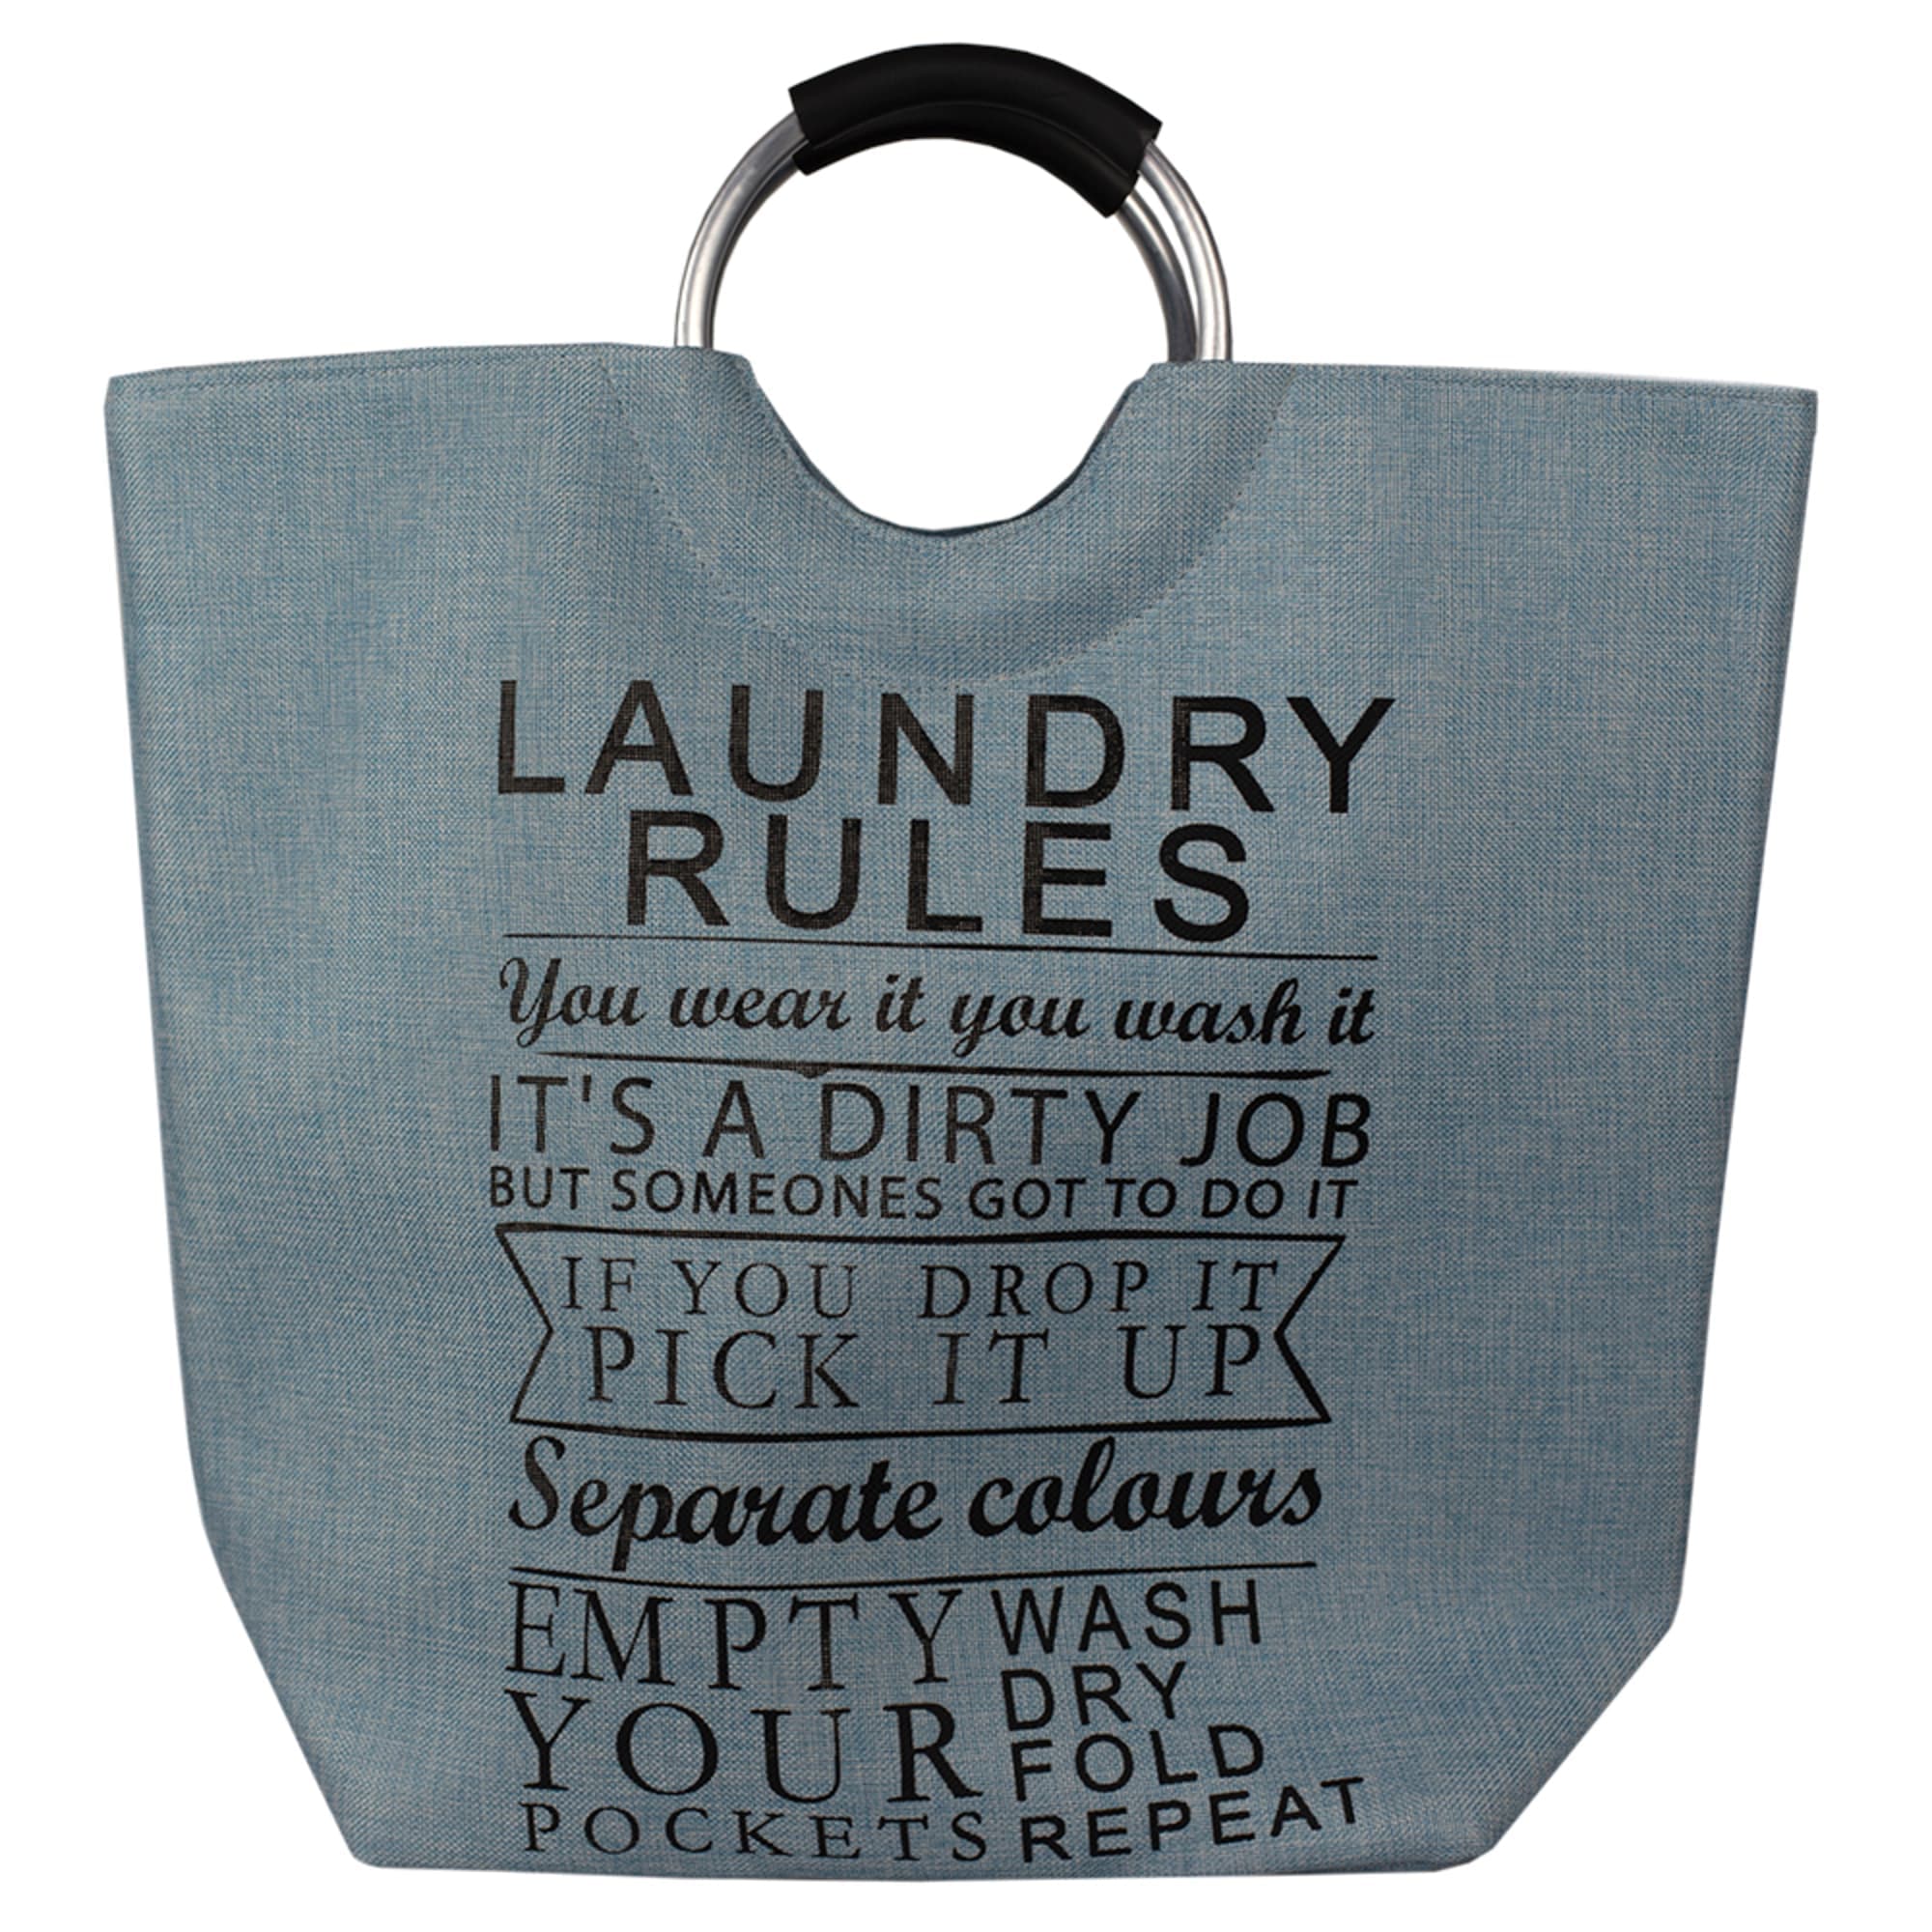 Home Basics Laundry Rules Canvas Hamper Tote with Soft Grip Handles, Blue $12 EACH, CASE PACK OF 6